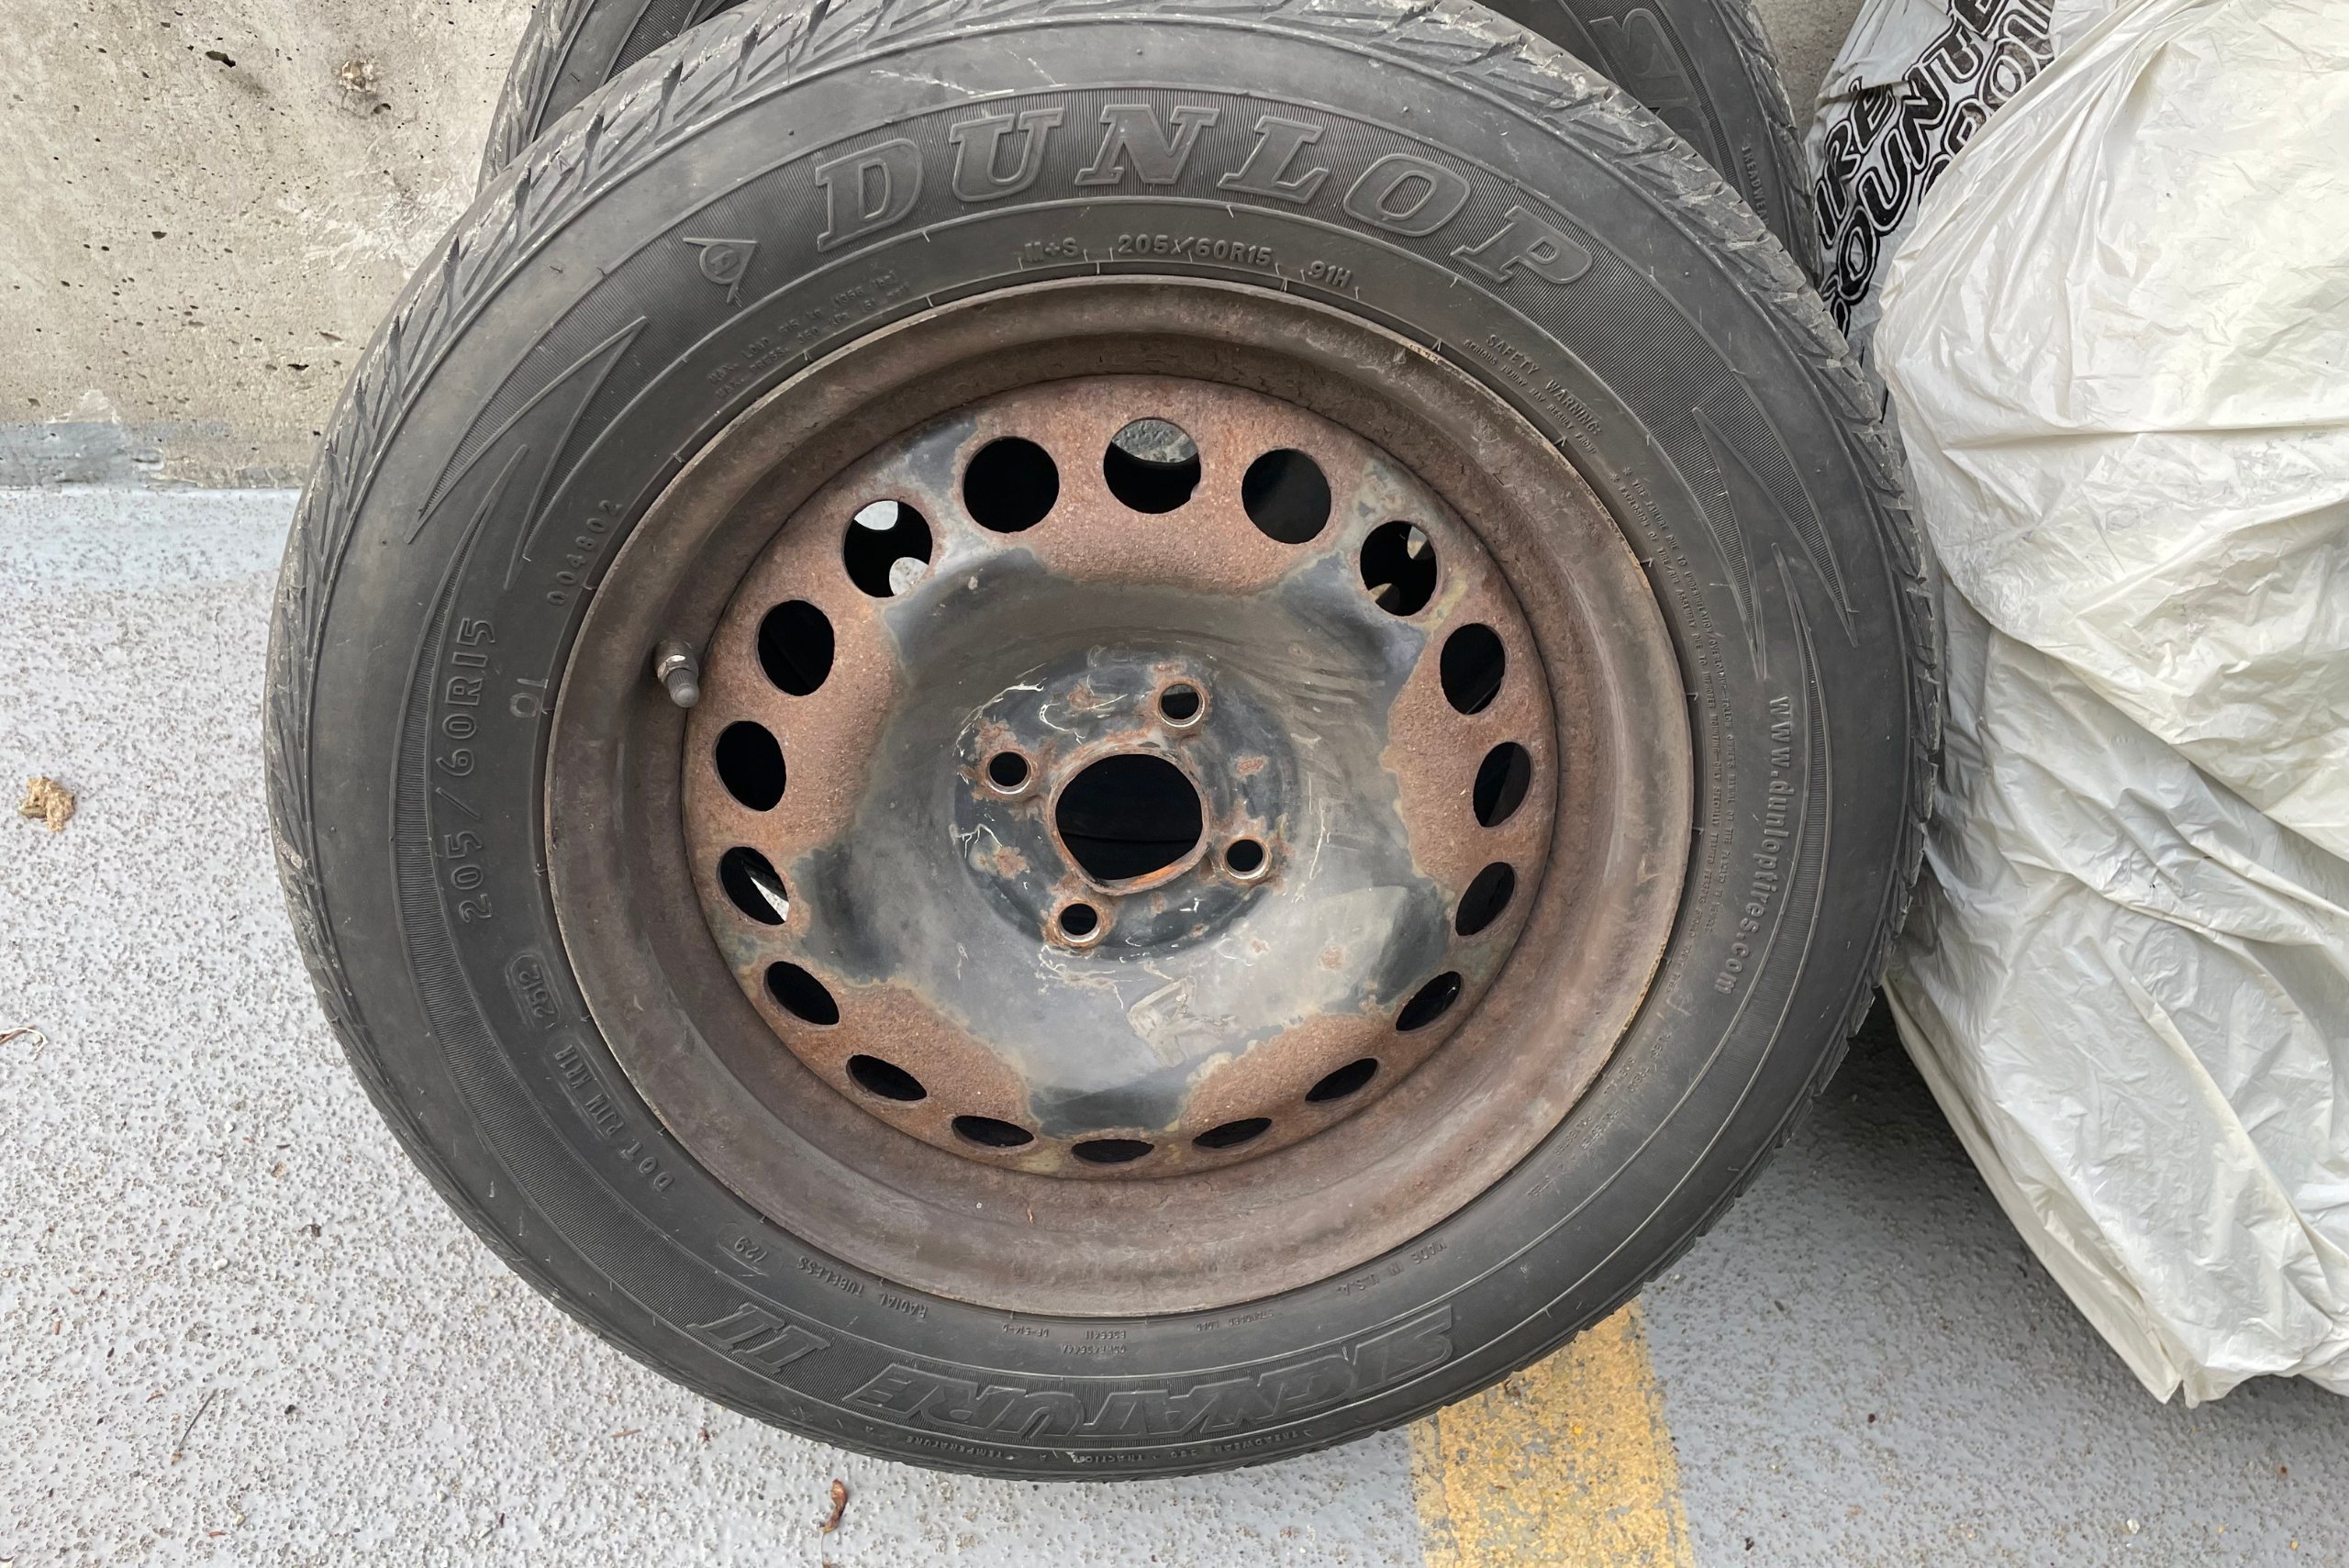 A tire and wheel.